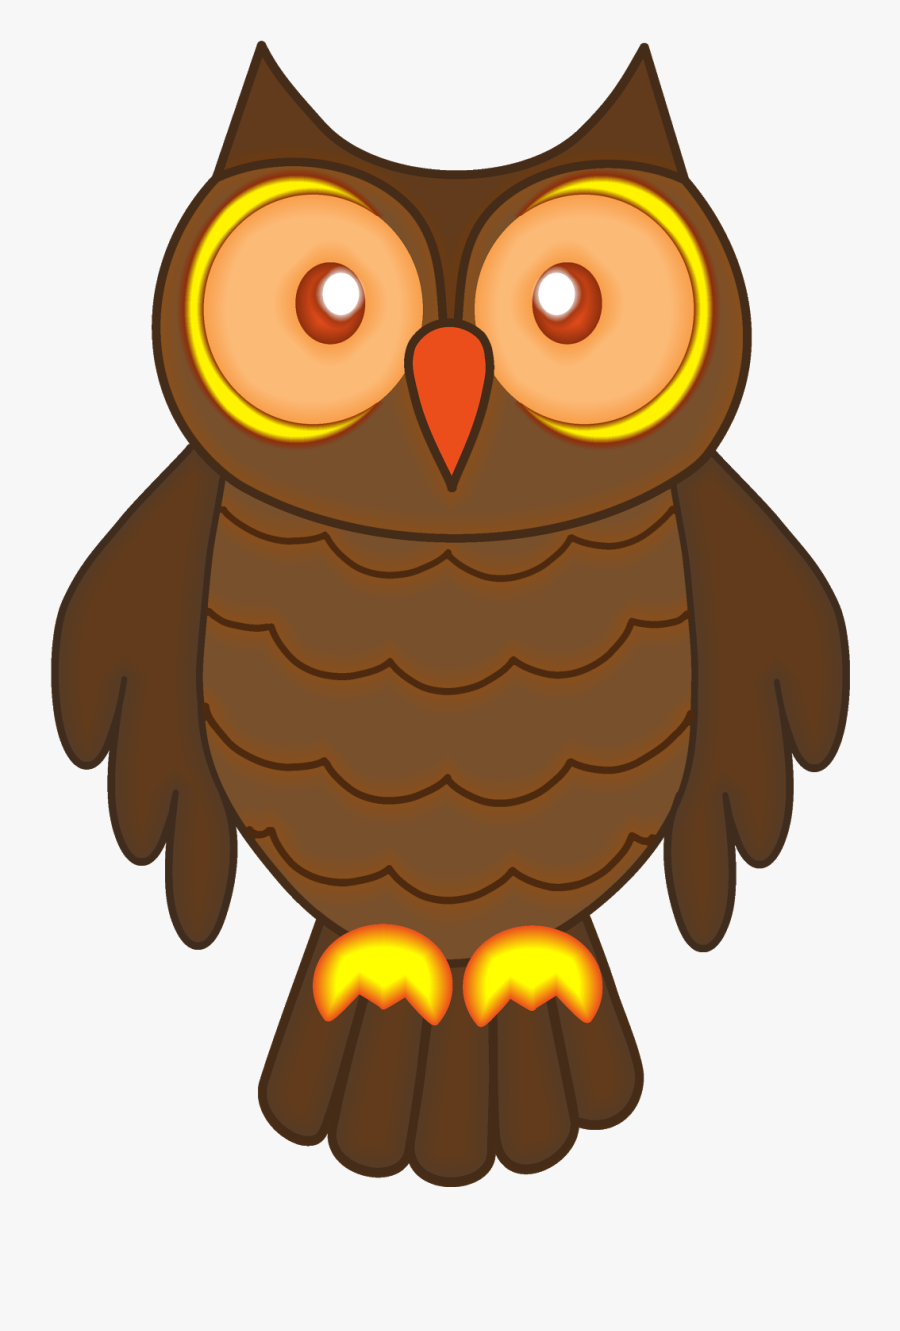 Fall Owl Clip Art Viewing Gallery - Transparent Background Owl Clipart Pn.....